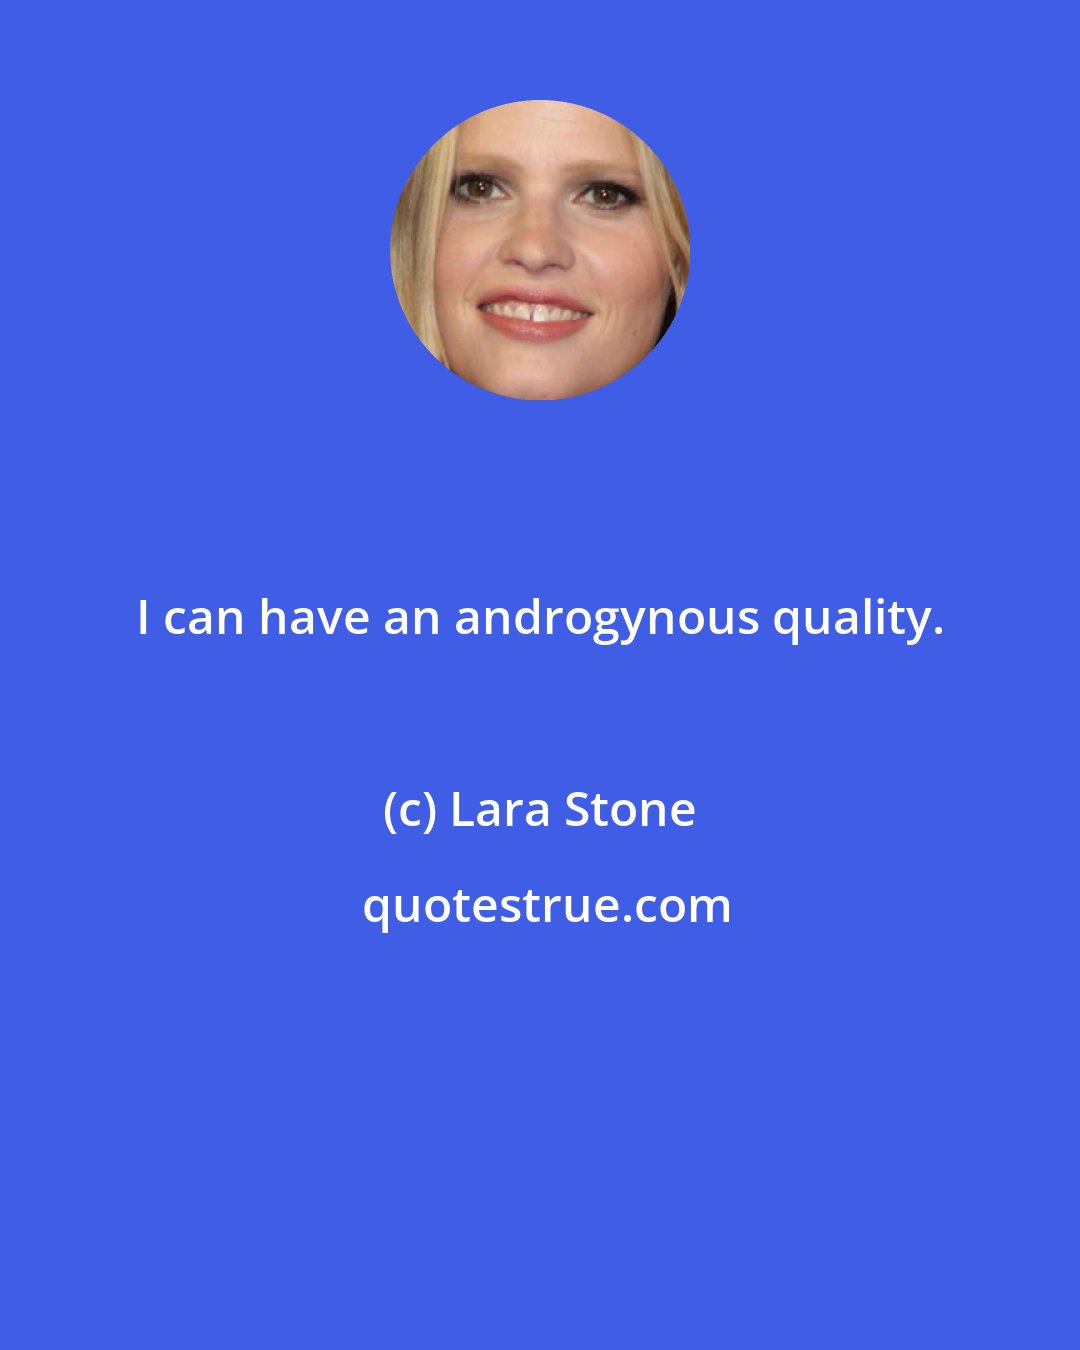 Lara Stone: I can have an androgynous quality.